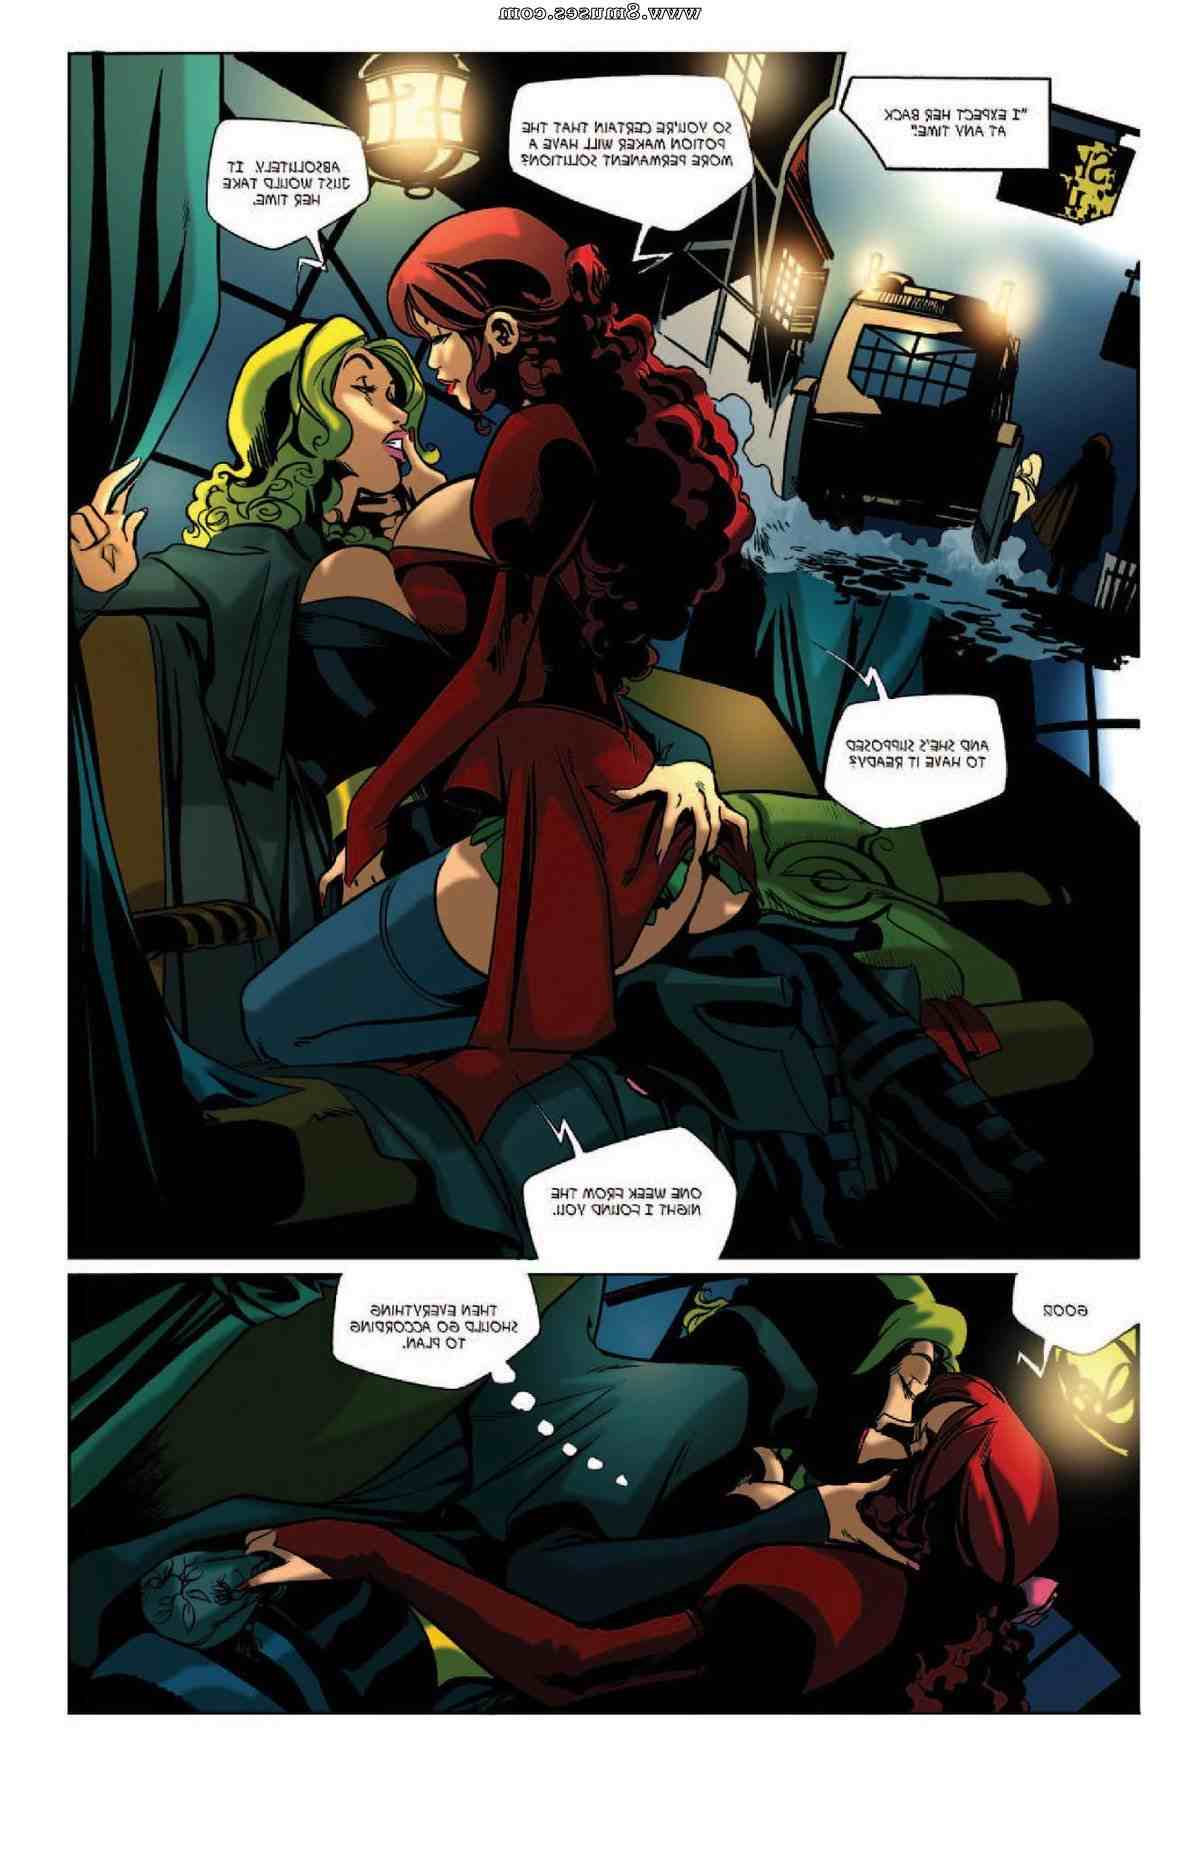 BE-Story-Club-Comics/Unstable-Assets Unstable_Assets__8muses_-_Sex_and_Porn_Comics_90.jpg